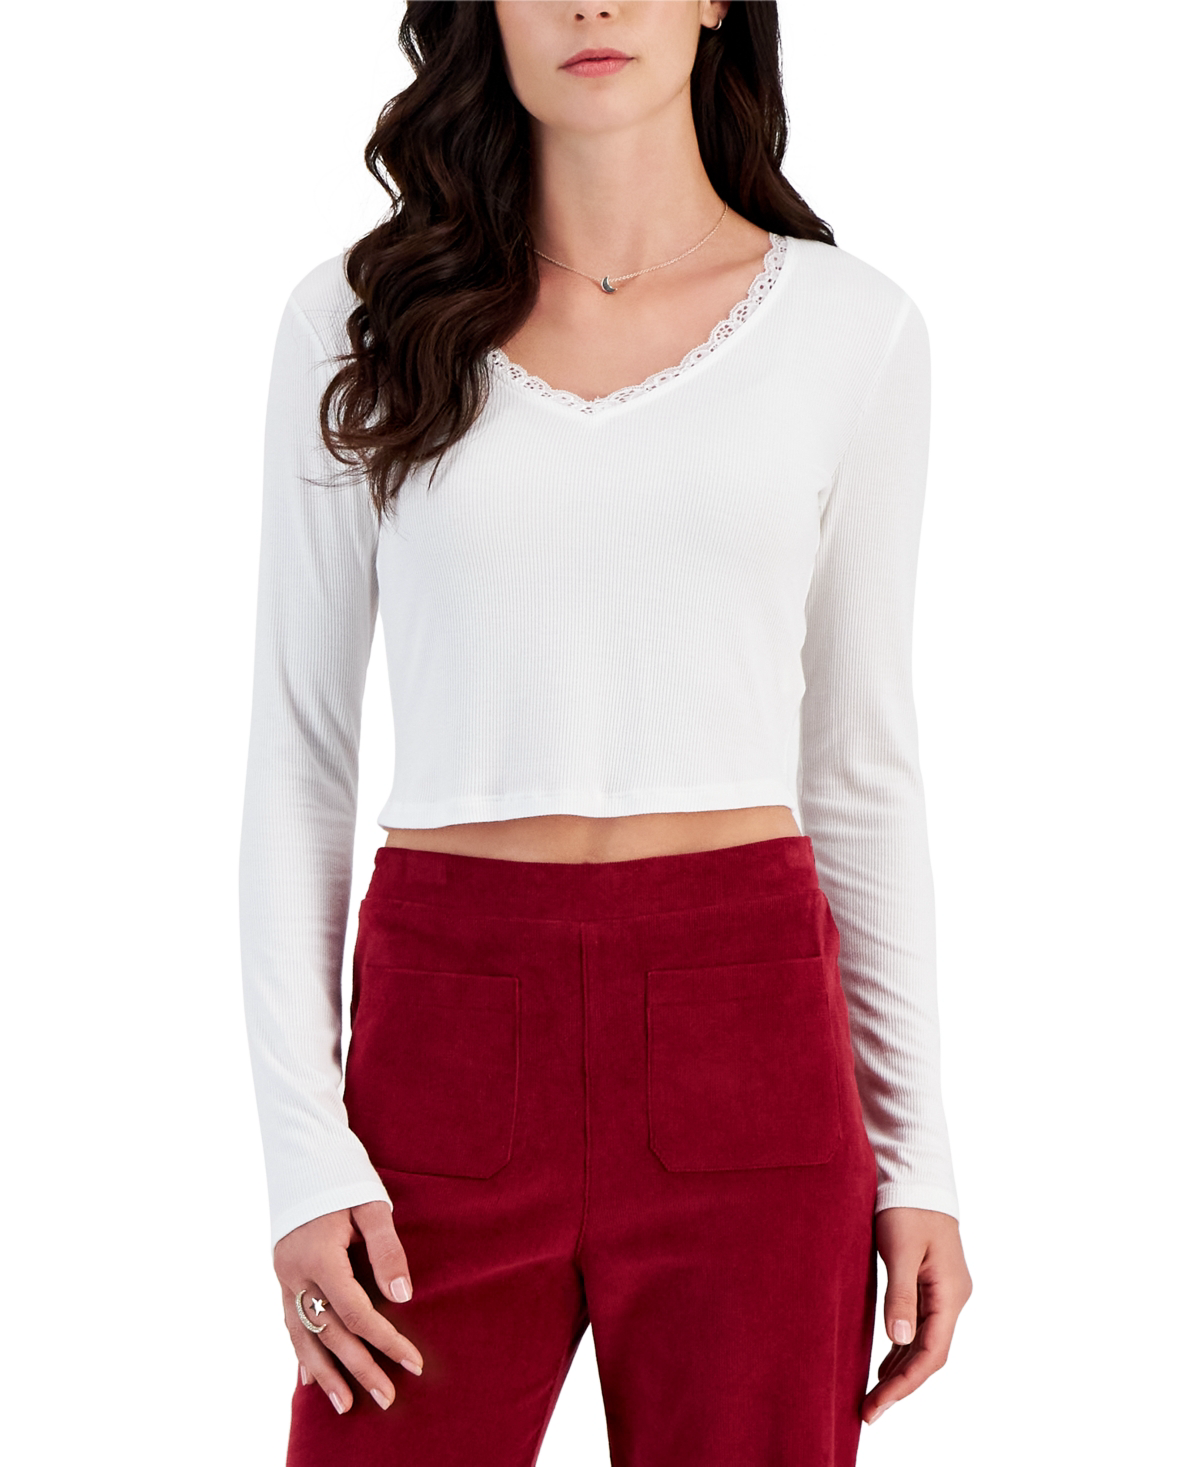 JUNIORS' LACE-TRIMMED V-NECK RIBBED TOP IN SNOW WHITE Self Esteem goes cropped and cozy for trend-right style this season with this lace-trimmed top. Juniors Juniors' Clothing - Tops